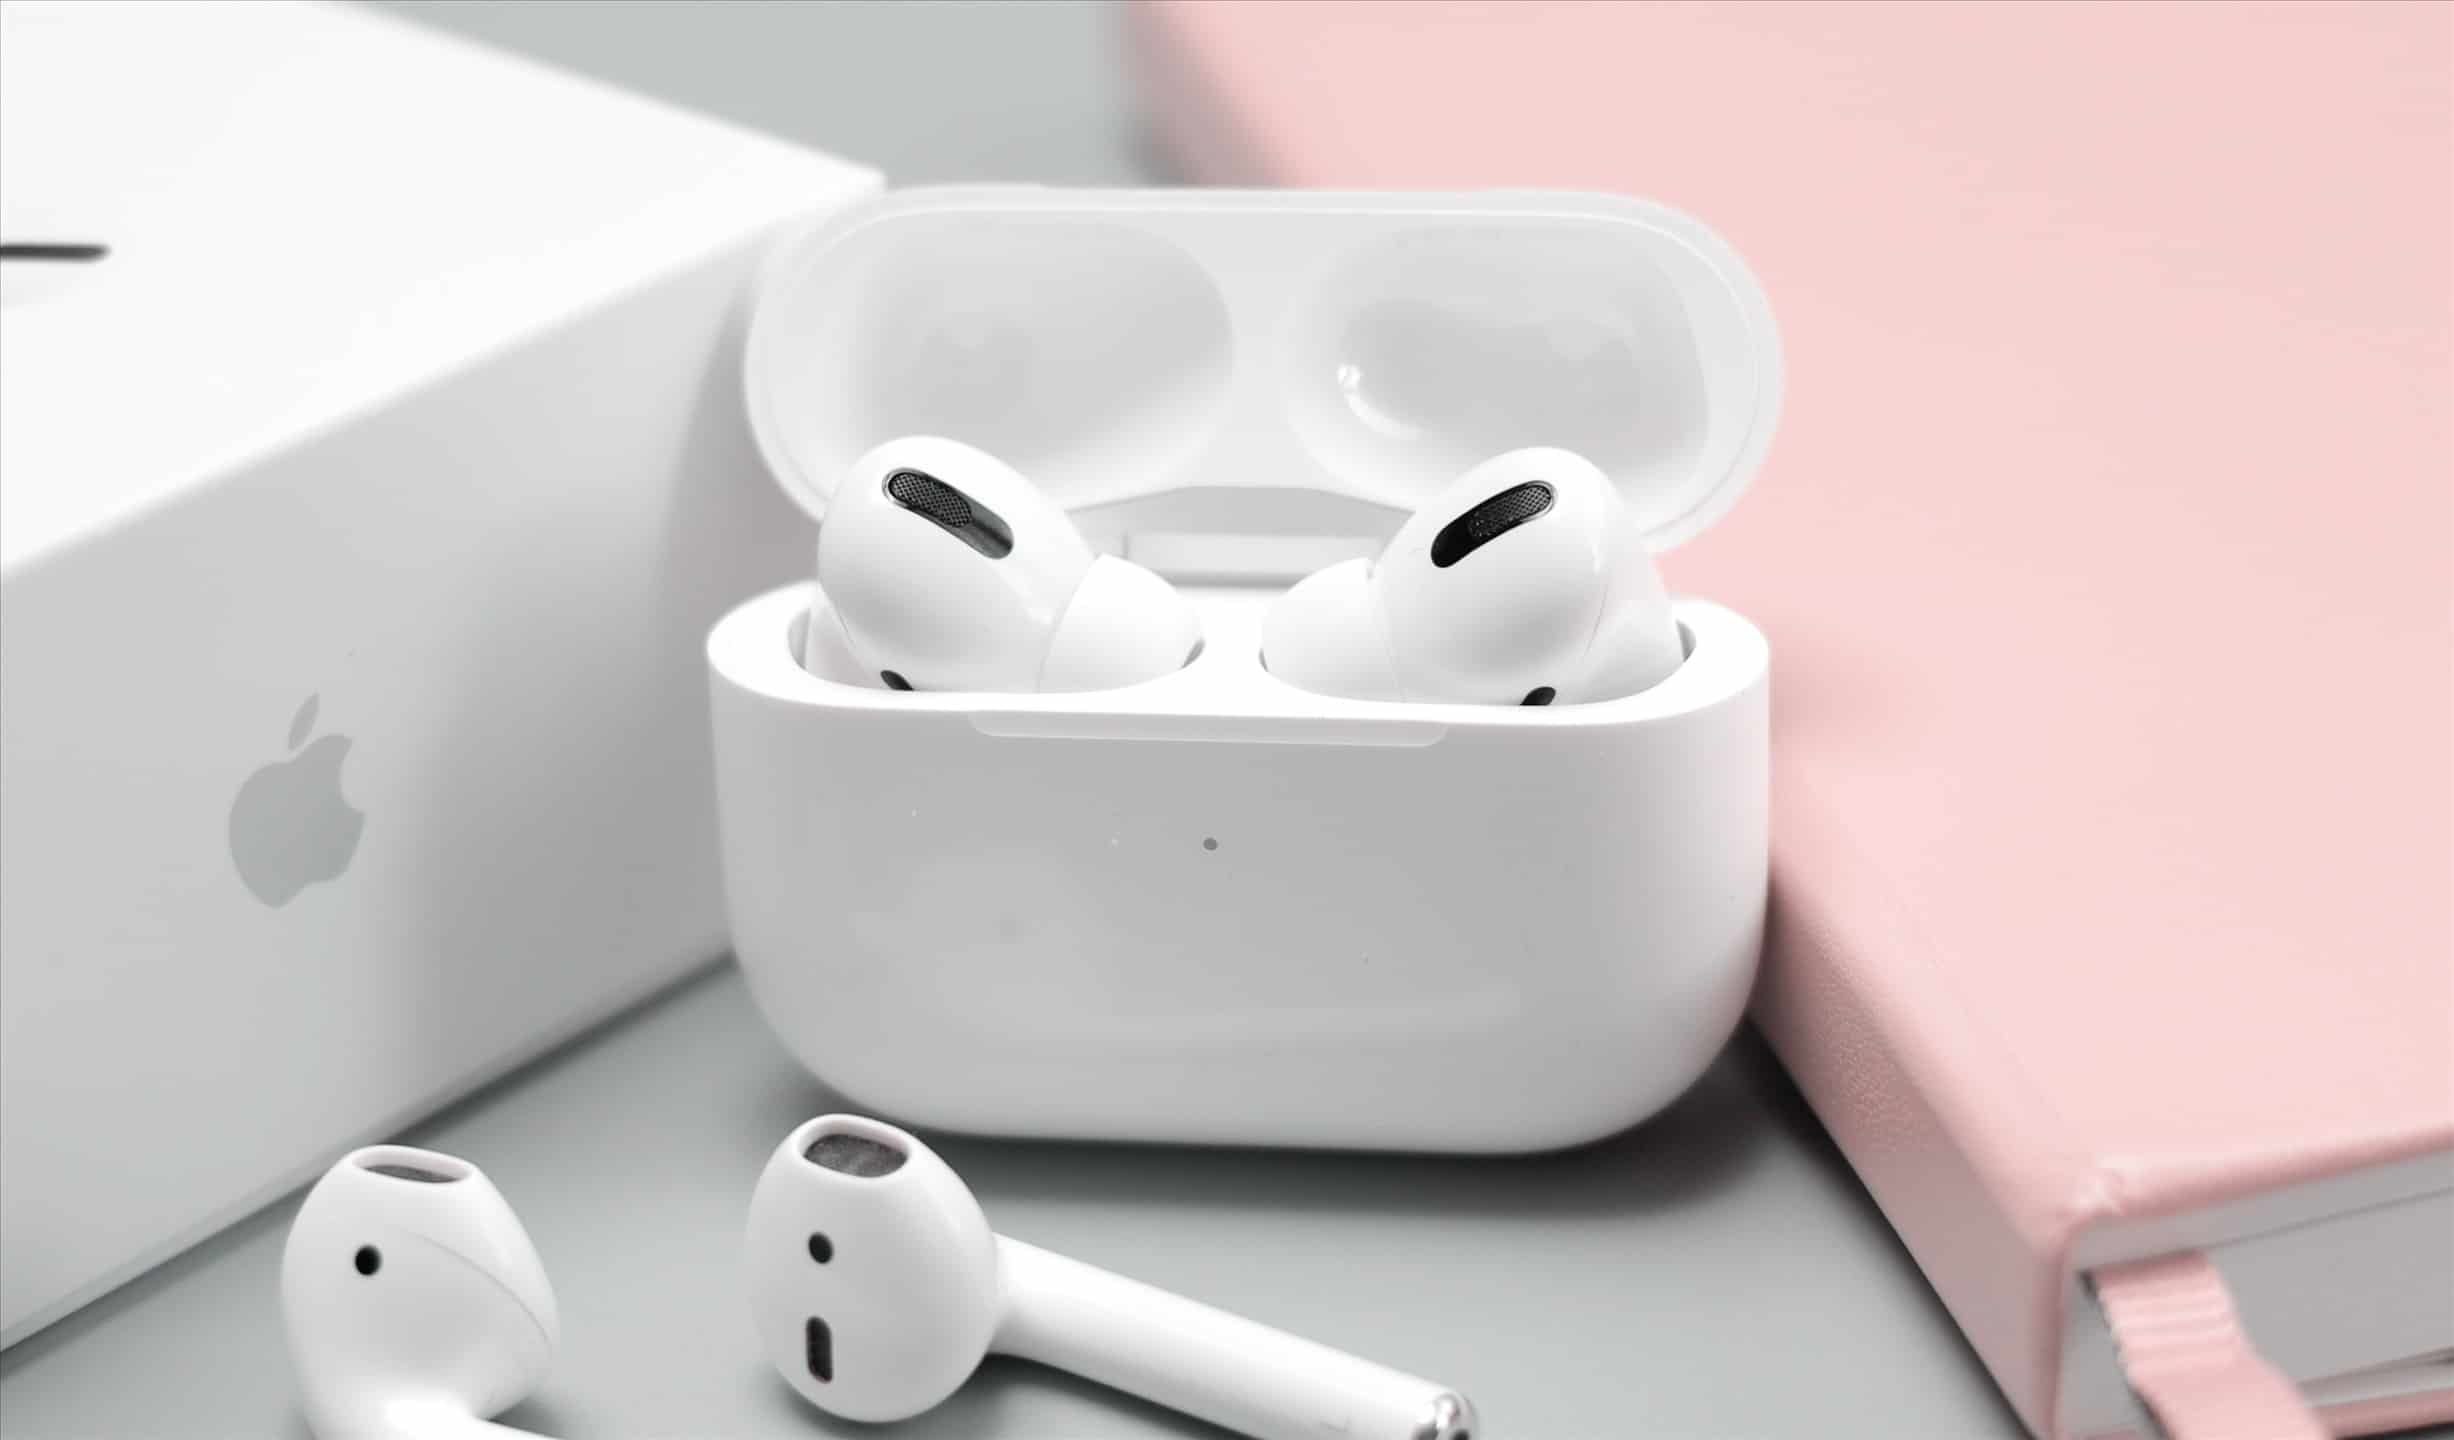 How to get an AirPod replacement – Here is the guide